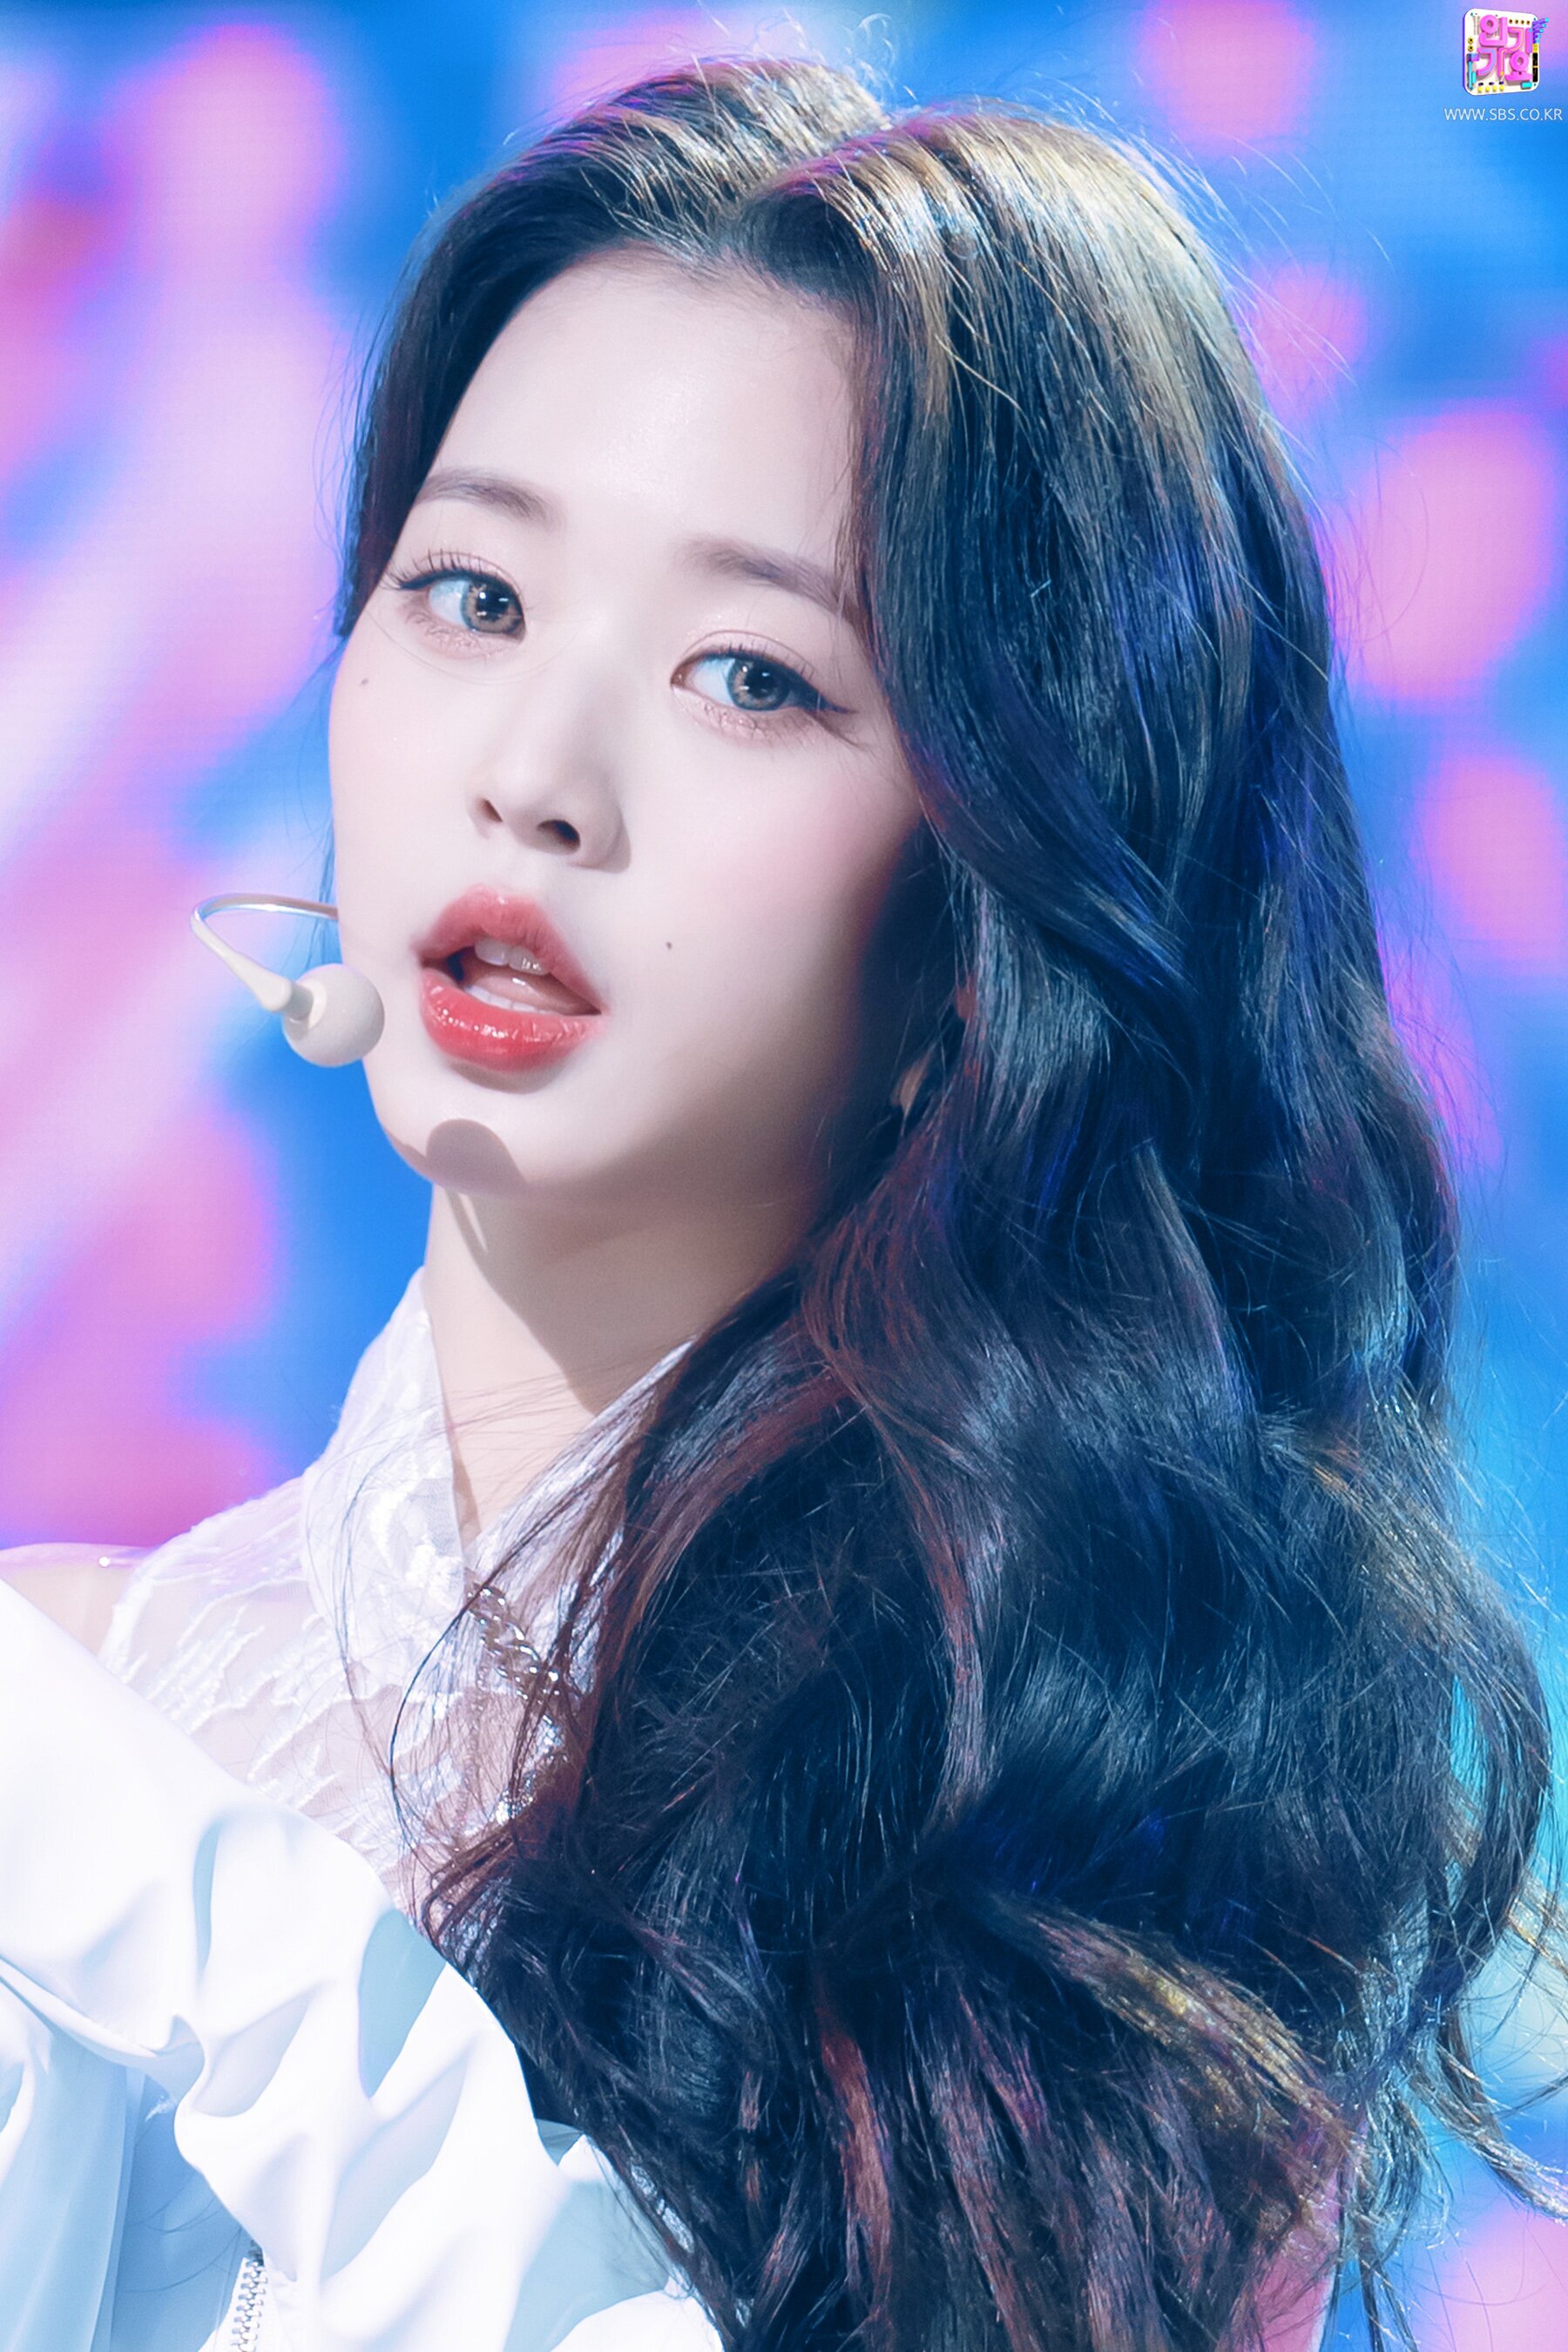 December 12, 2021 IVE Wonyoung - 'ELEVEN' at Inkigayo | Kpopping